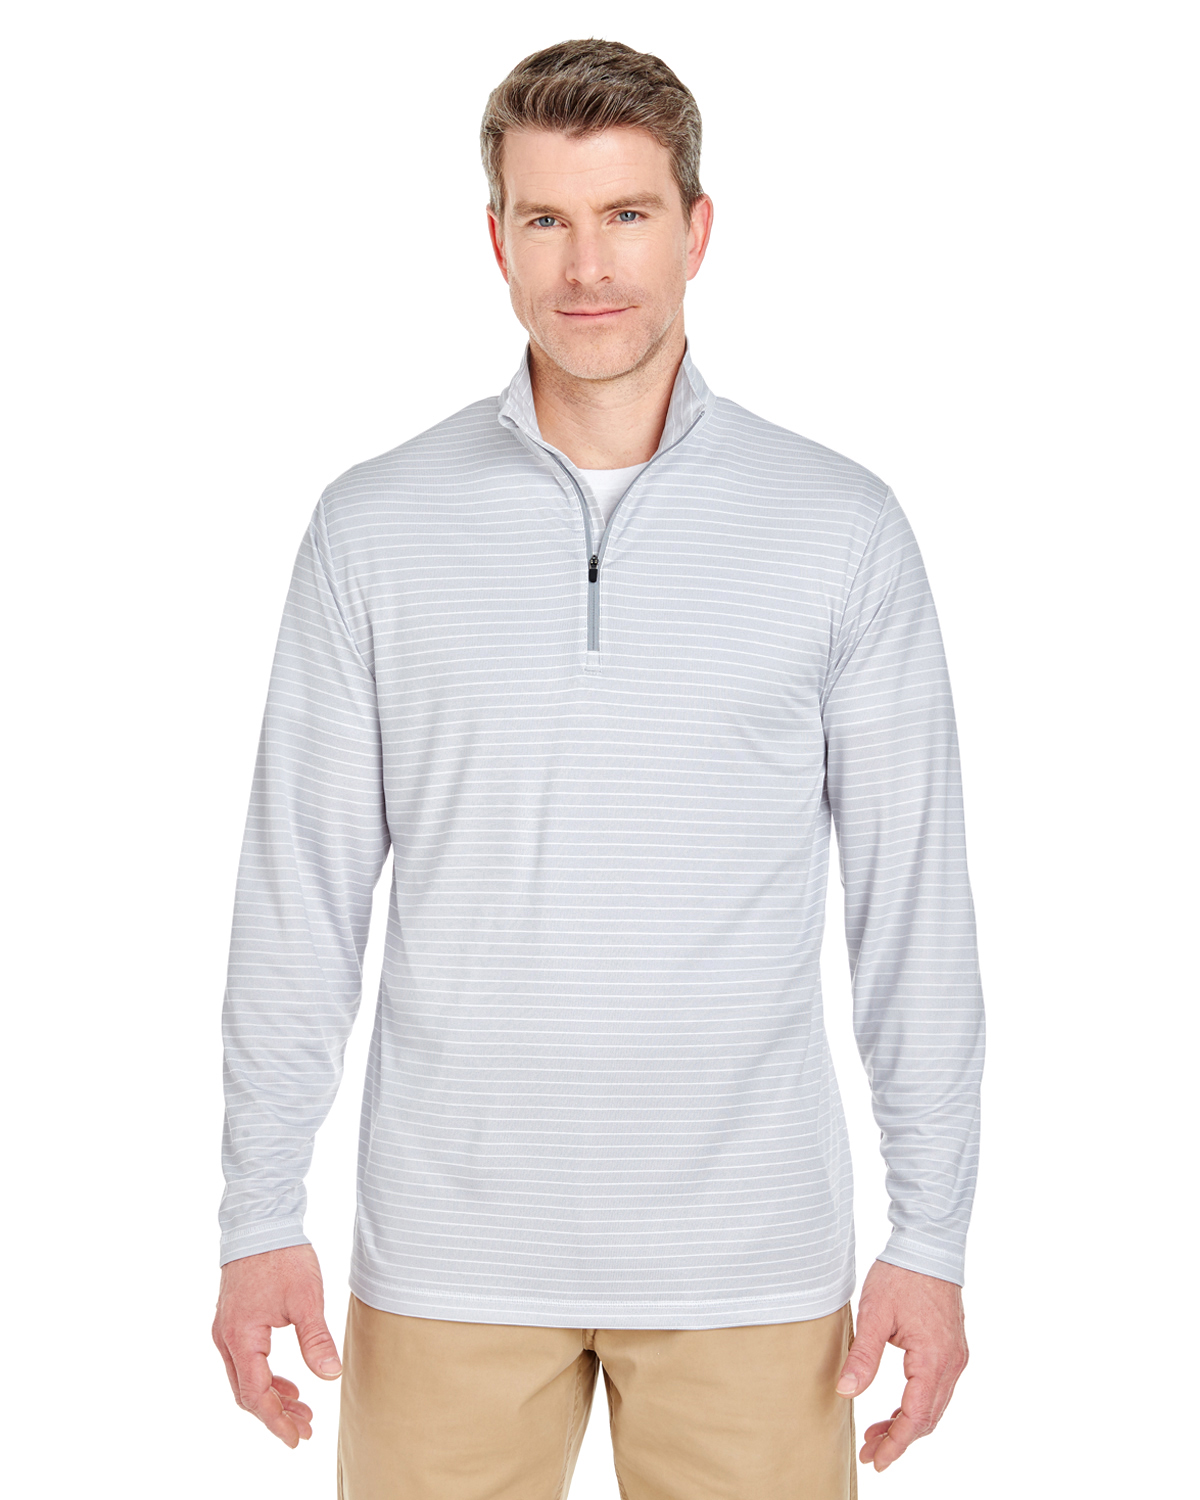 UltraClub Adult Striped Quarter-Zip Pullover